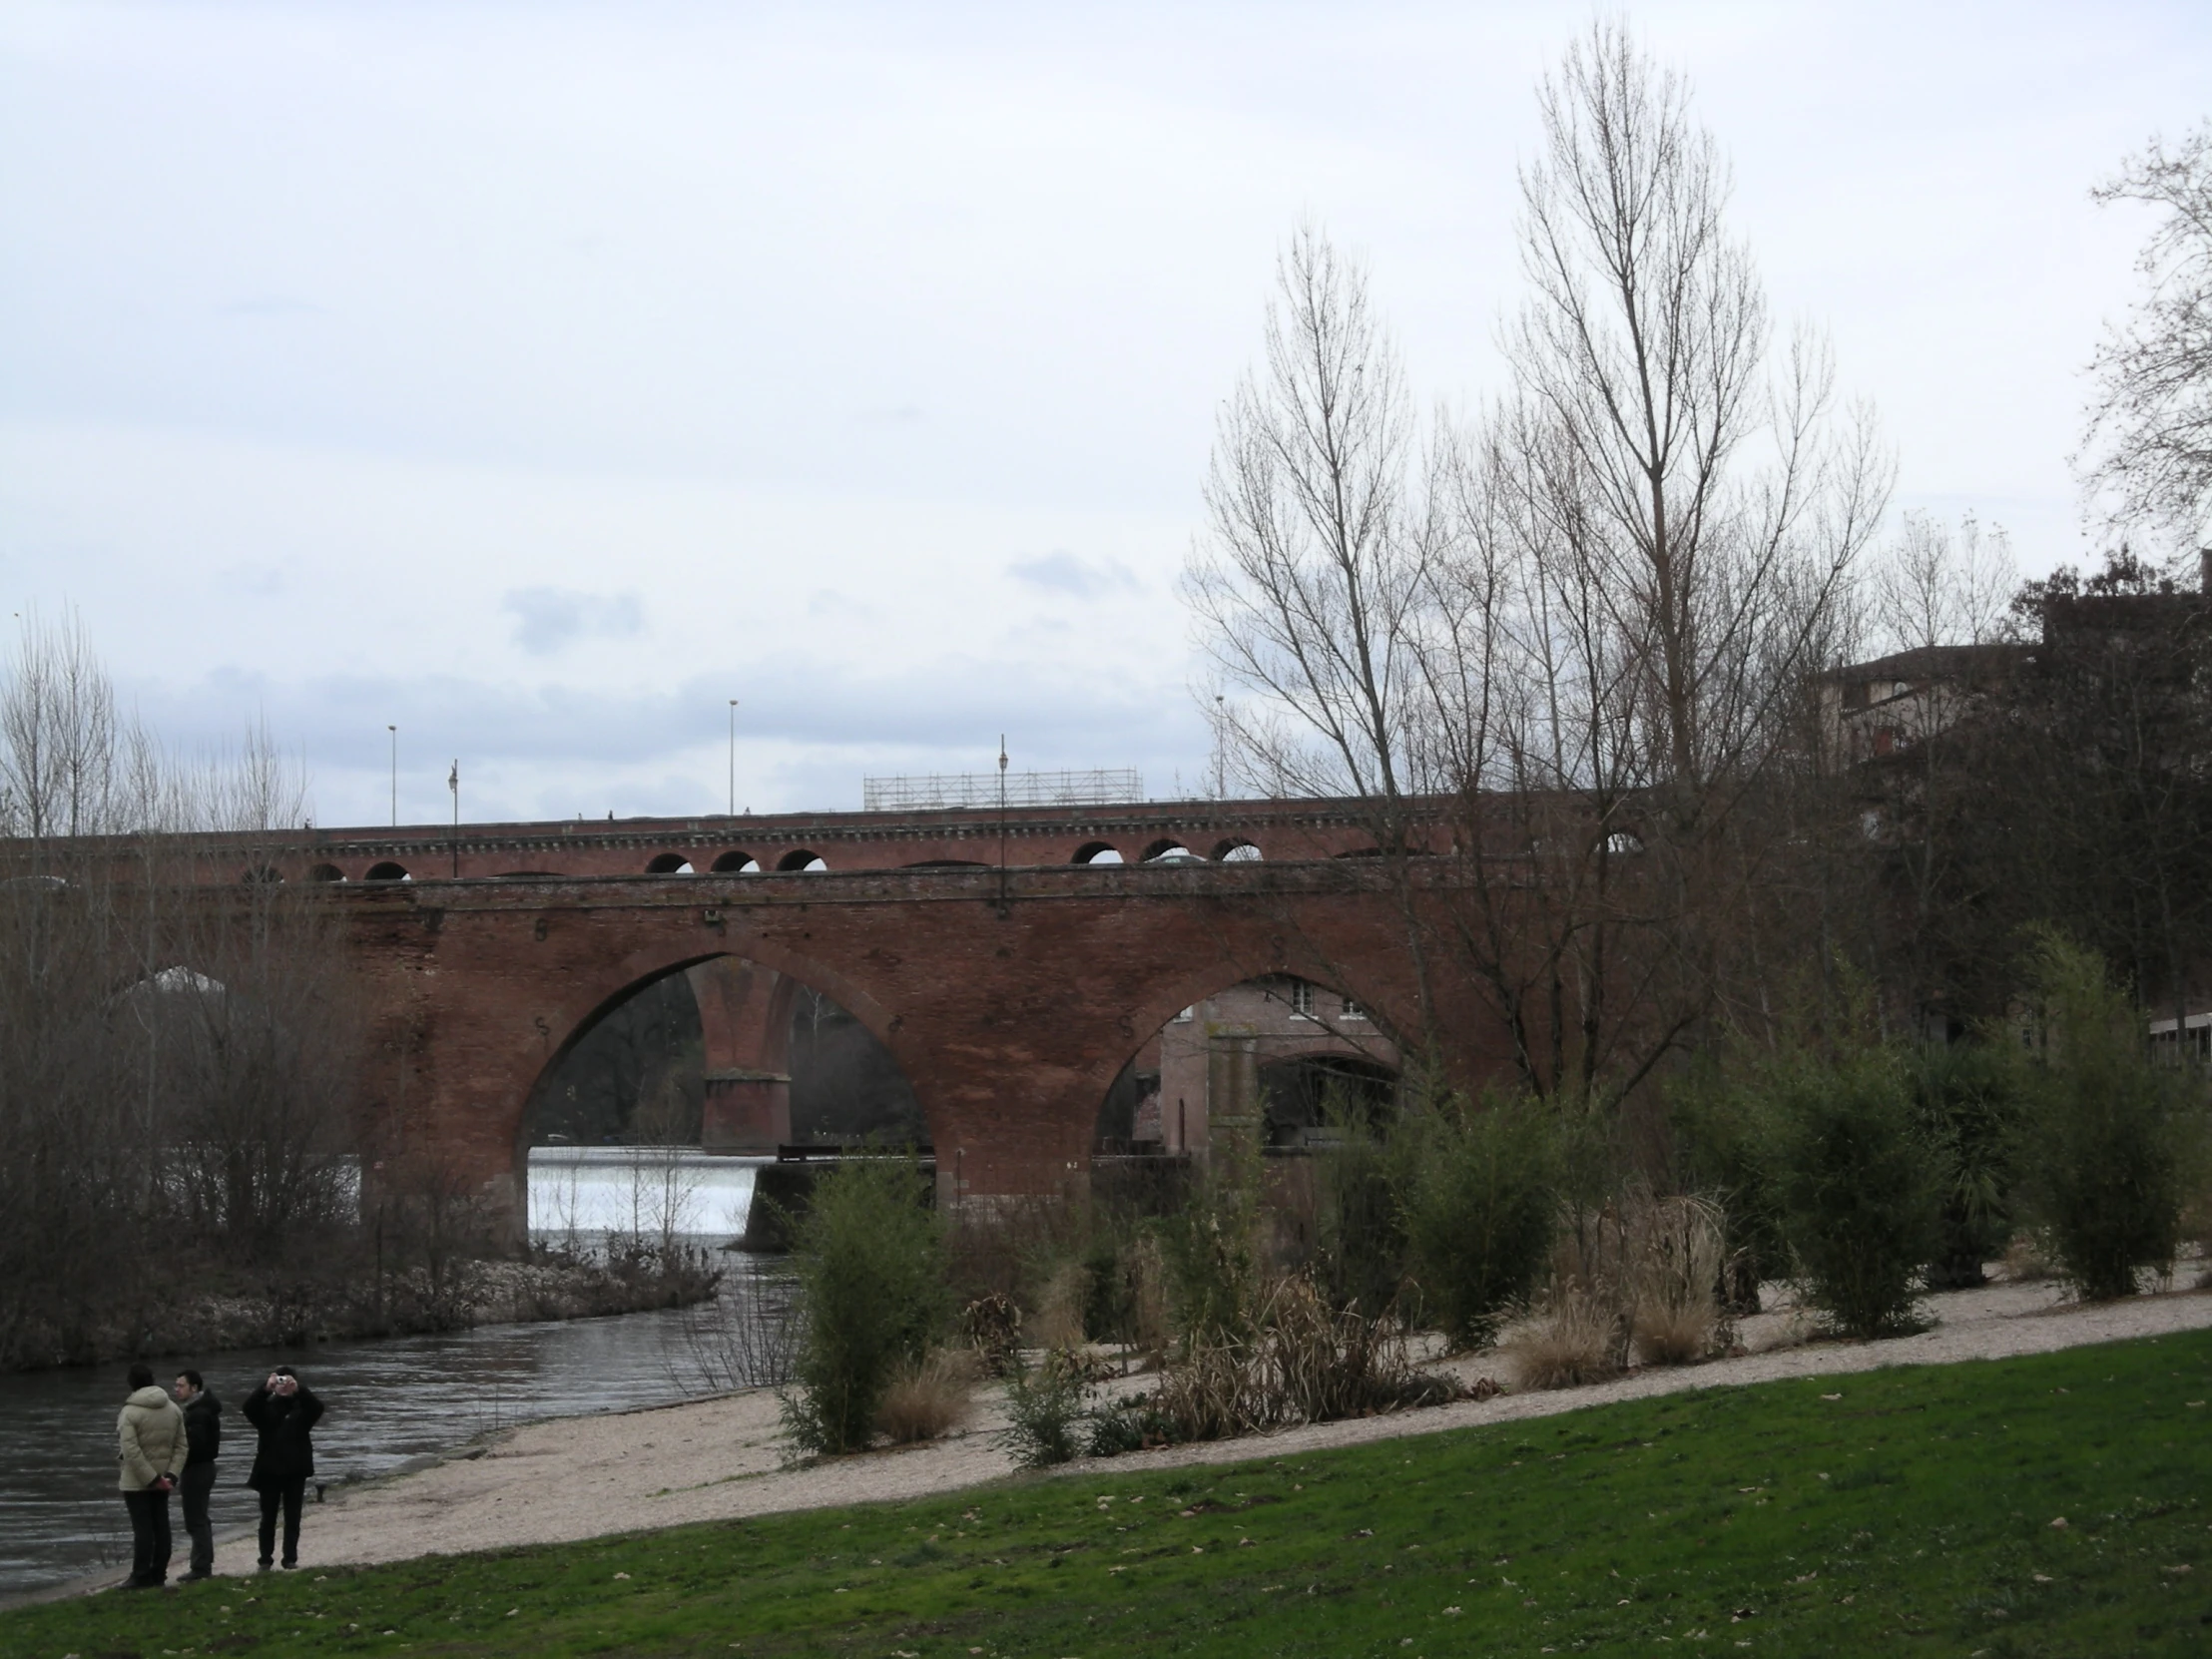 two people in black walking past a bridge and water